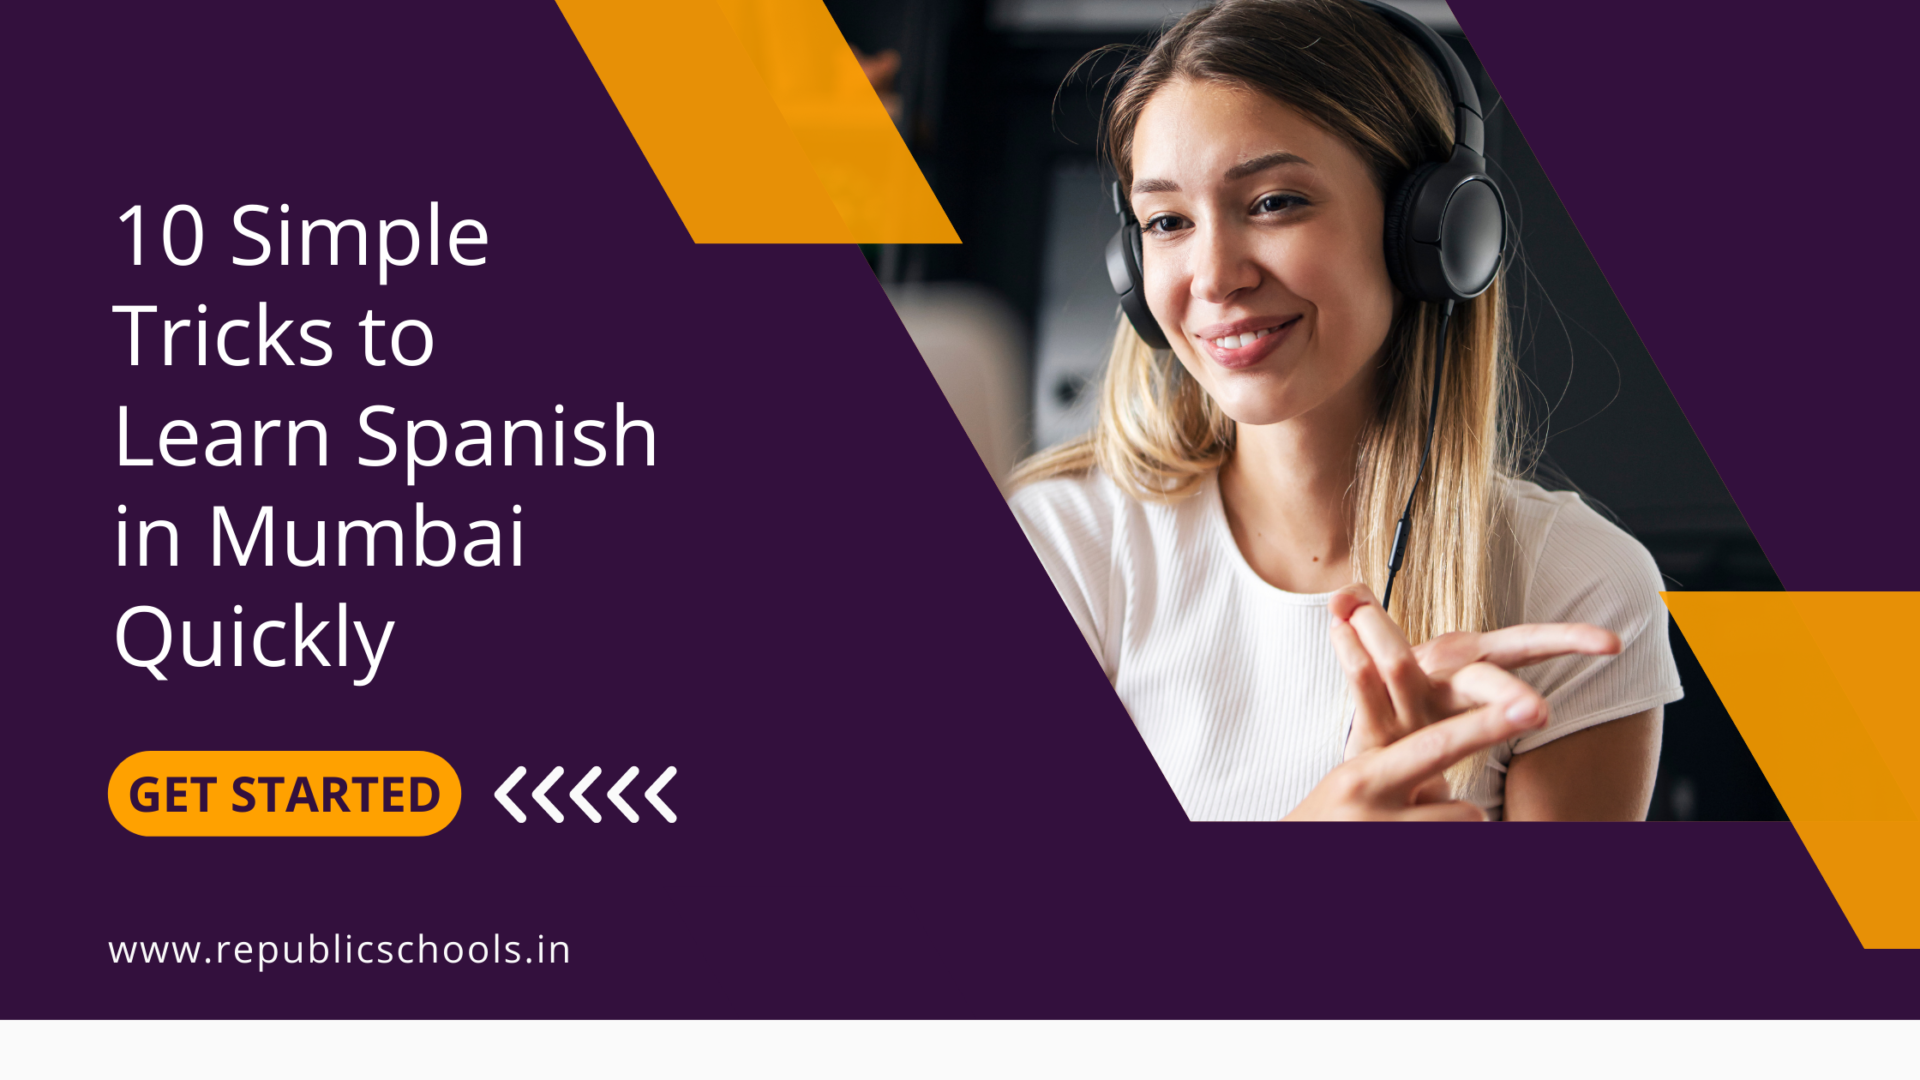 10 Simple Tricks to Learn Spanish in Mumbai Quickly